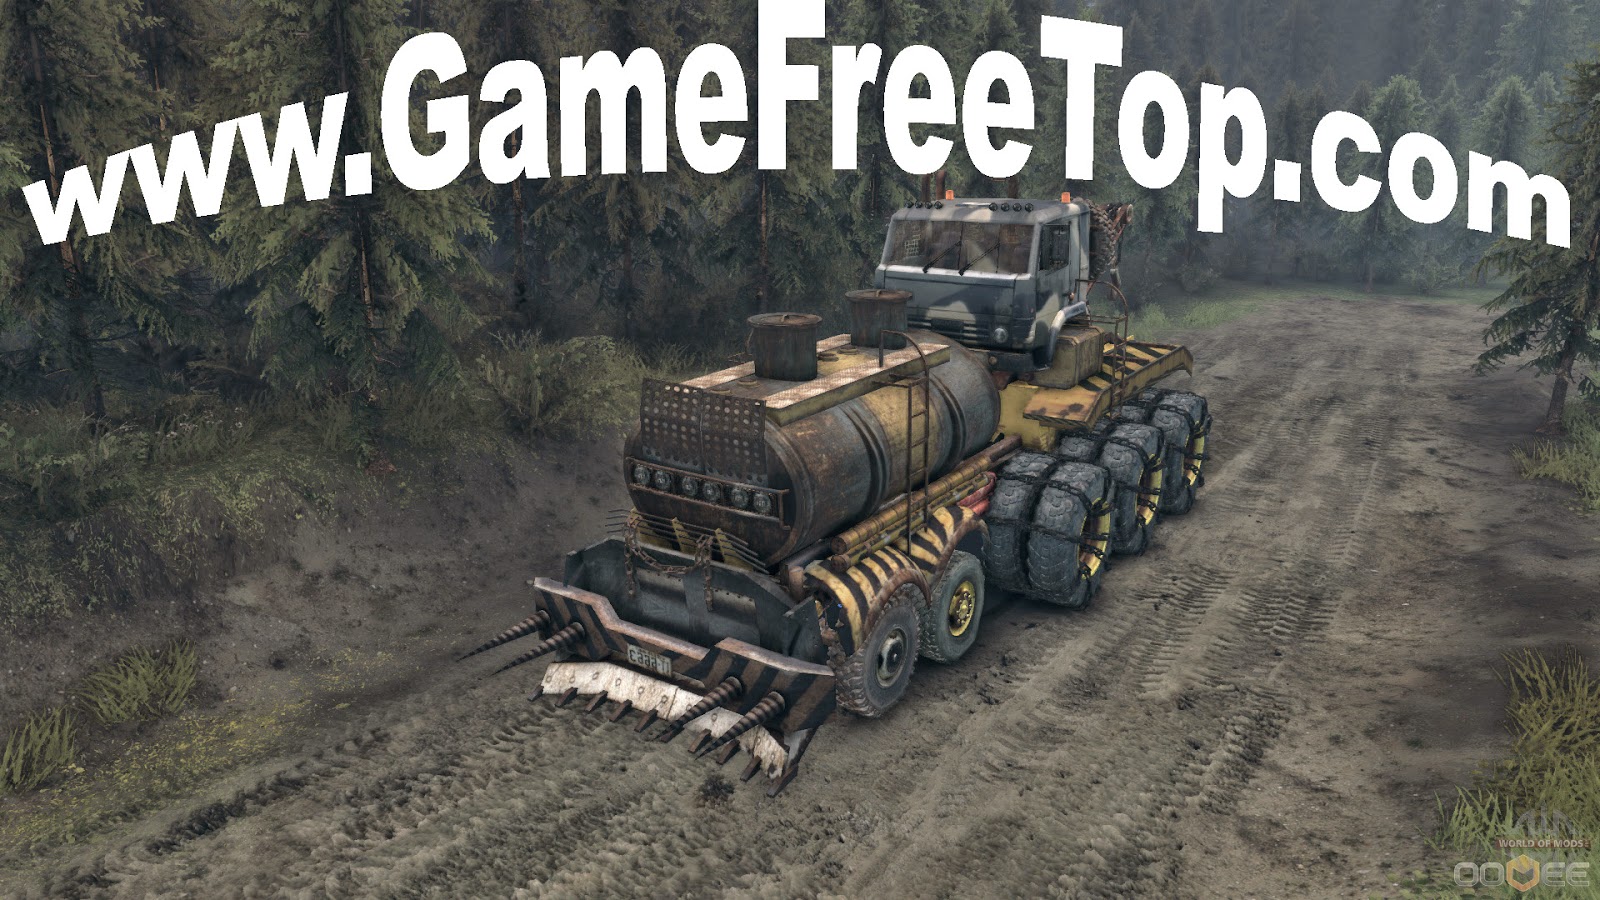 spintires 2014 free download